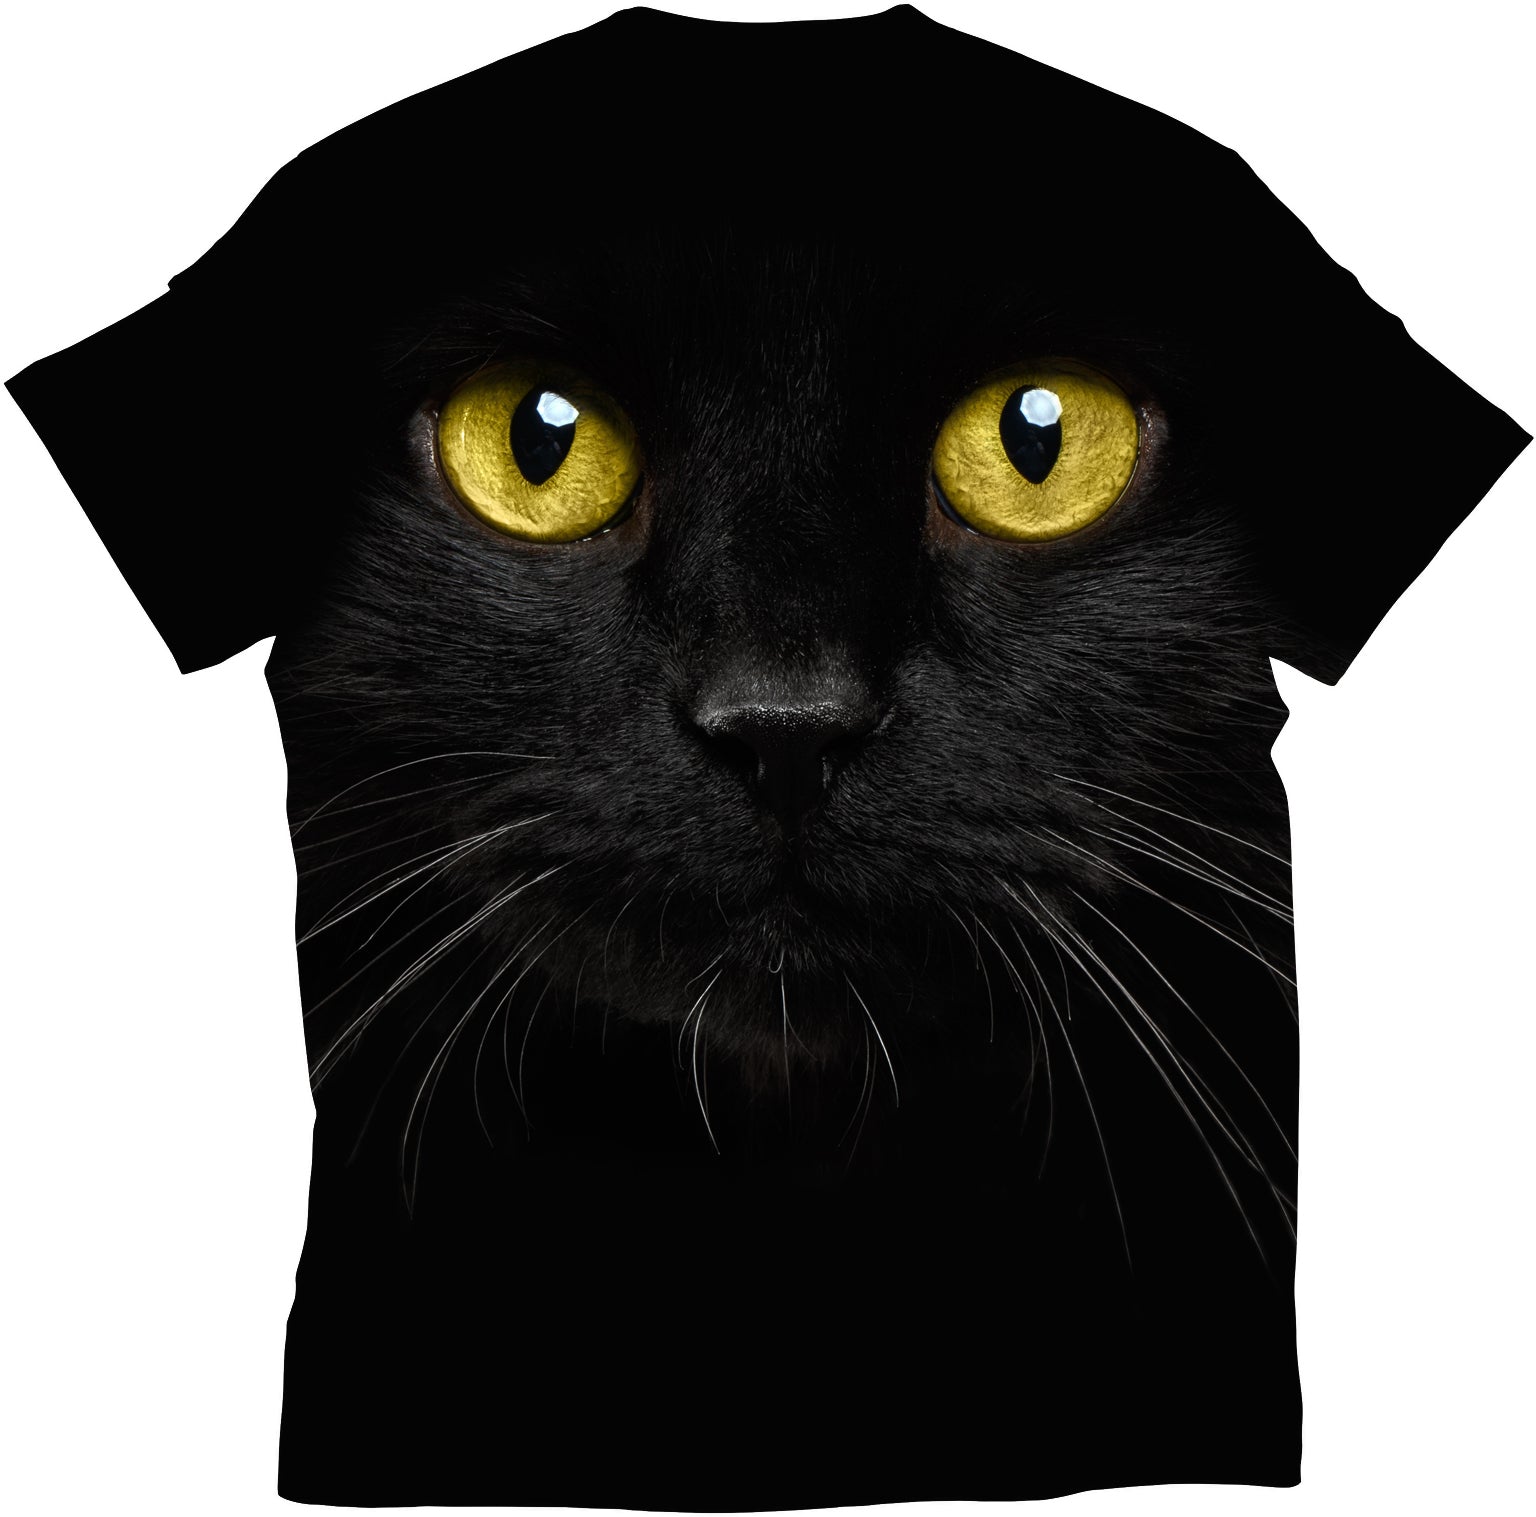 dogsindia dogspot dogbazar yellow eyed black cat t shirt the mountain t shirt 3D animal print t shirt upcoming dog show in india kennel club of india next dog show kci dog show calendar custom dog t shirts for humans dog t shirts india funny unique graphic t shirts t shirts with dog faces cute dog shirts dog t shirts for humans dogteeshop dog lover t shirt dog t shirts for humans dog clothes online india dog print t shirts india bewakoof redwolf souled store fully filmy osomwear